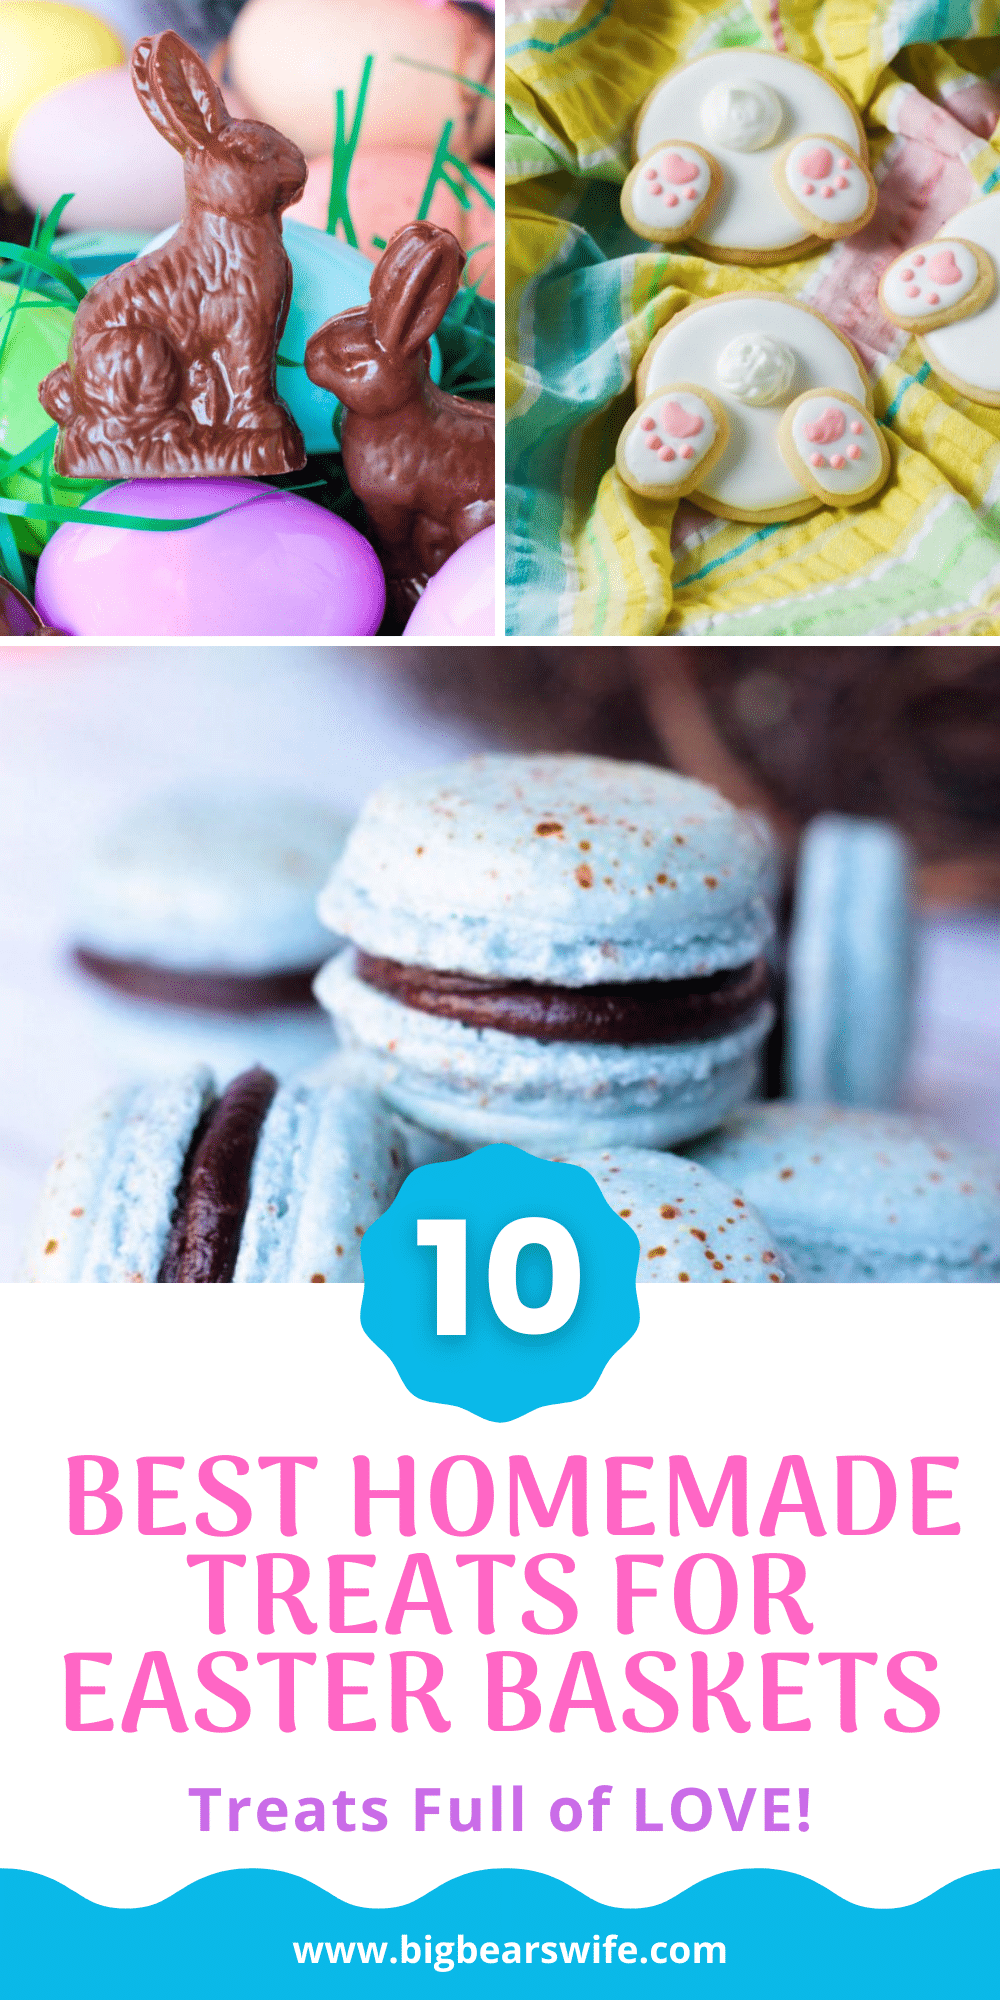 If you're filling Easter baskets for your kids or grandchildren this year or maybe just helping the Easter Bunny with some ideas, you'll love these Homemade Easter Basket treats! Sure, store bought Easter surprises are neat but homemade treats are even better! Fill your little one's Easter basket with 10 of the best Homemade Treats for Easter Baskets this year!  via @bigbearswife